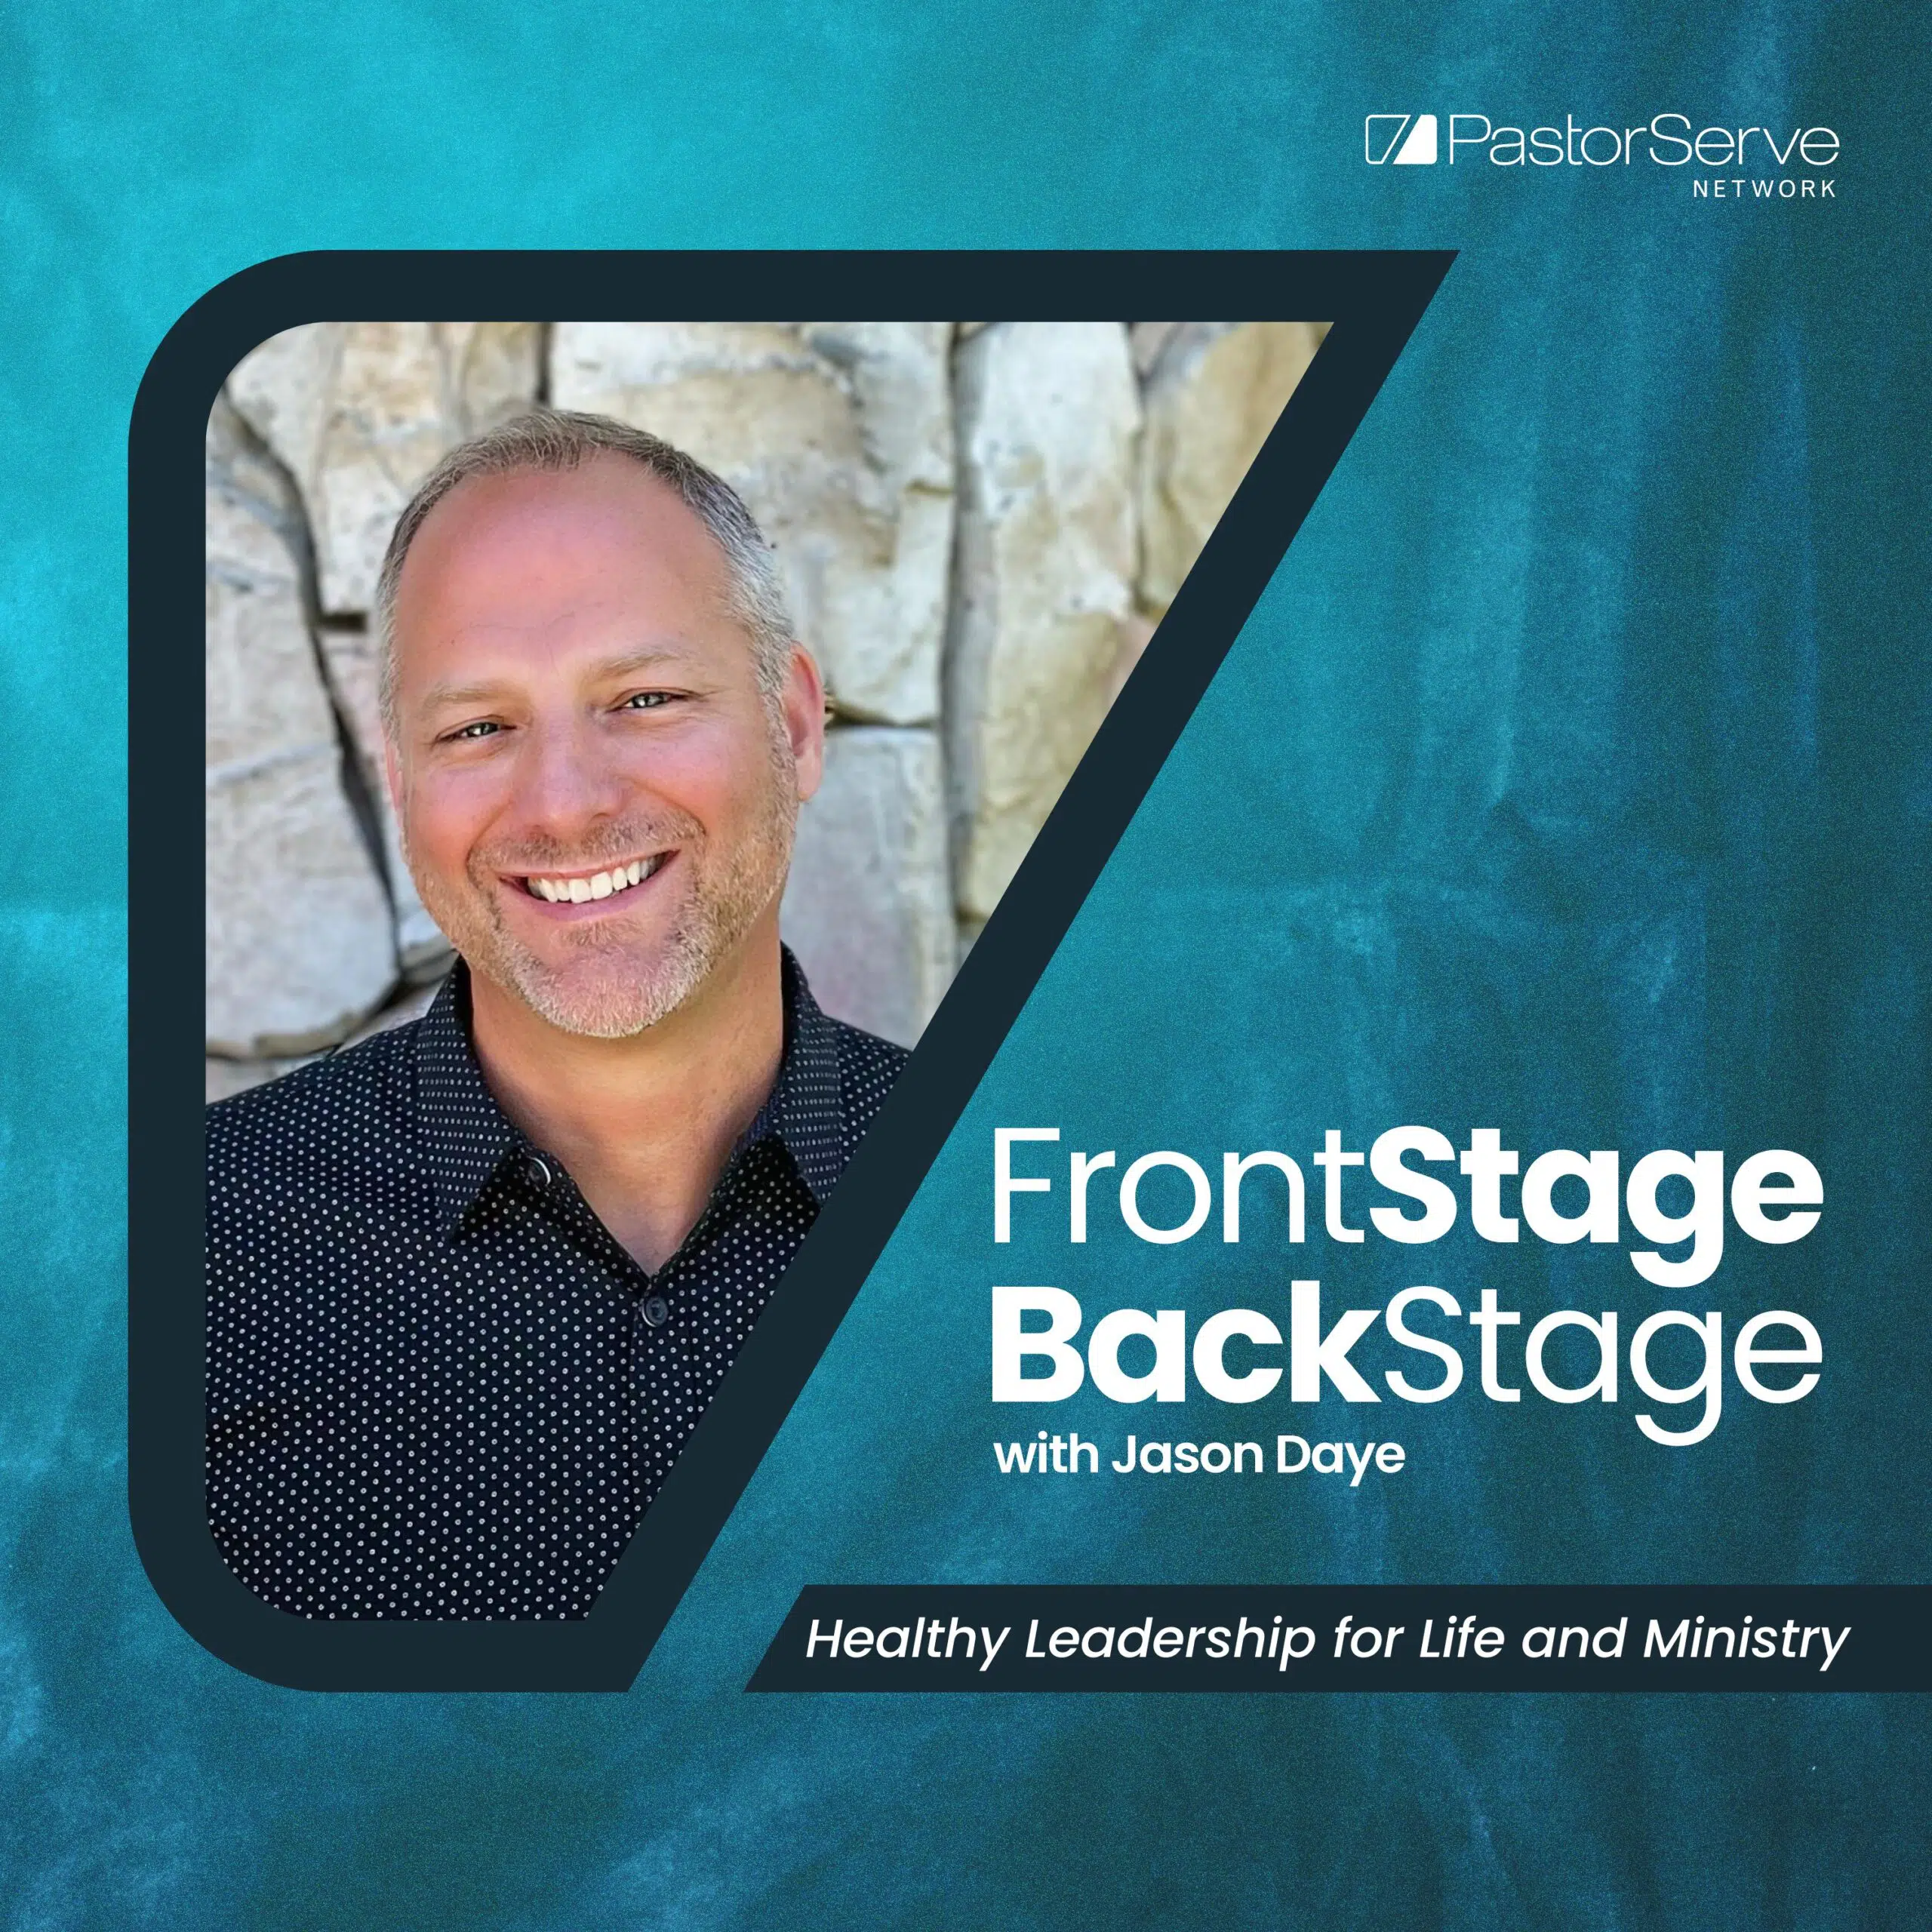 FrontStage BackStage with Jason Daye